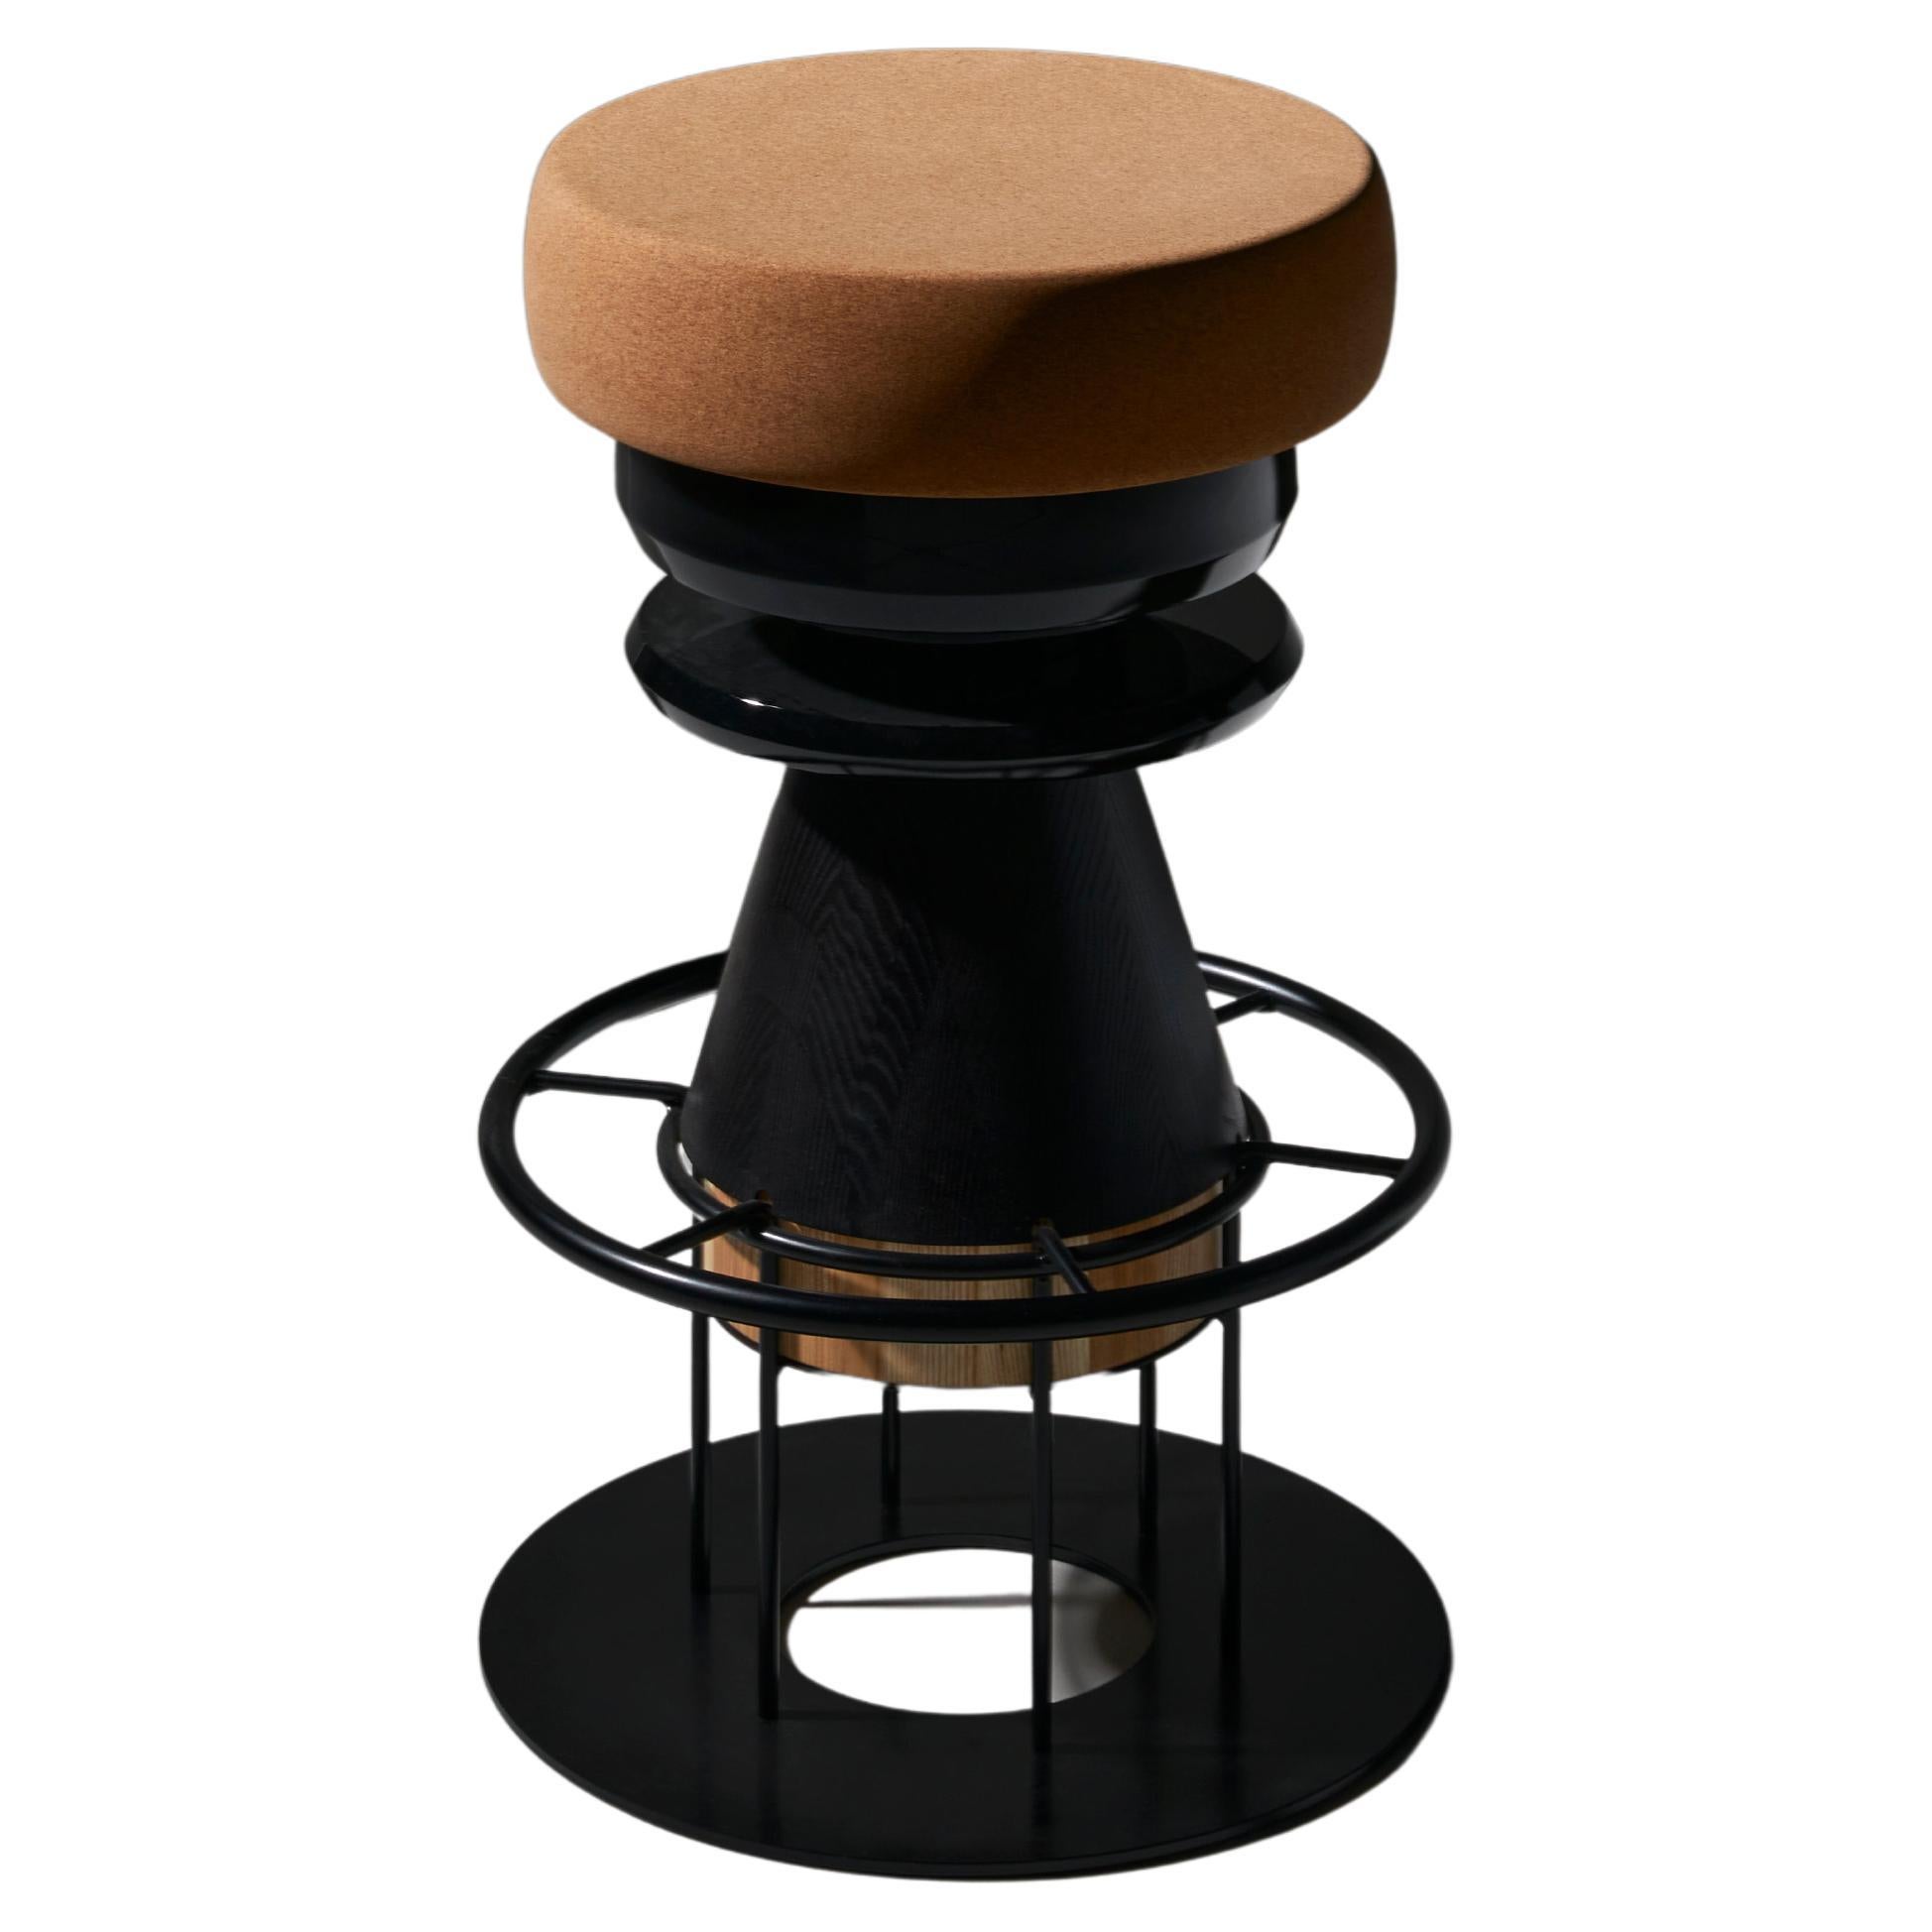 Tembo Stool, Shades of Black, by Note Design Studio for La Chance For Sale